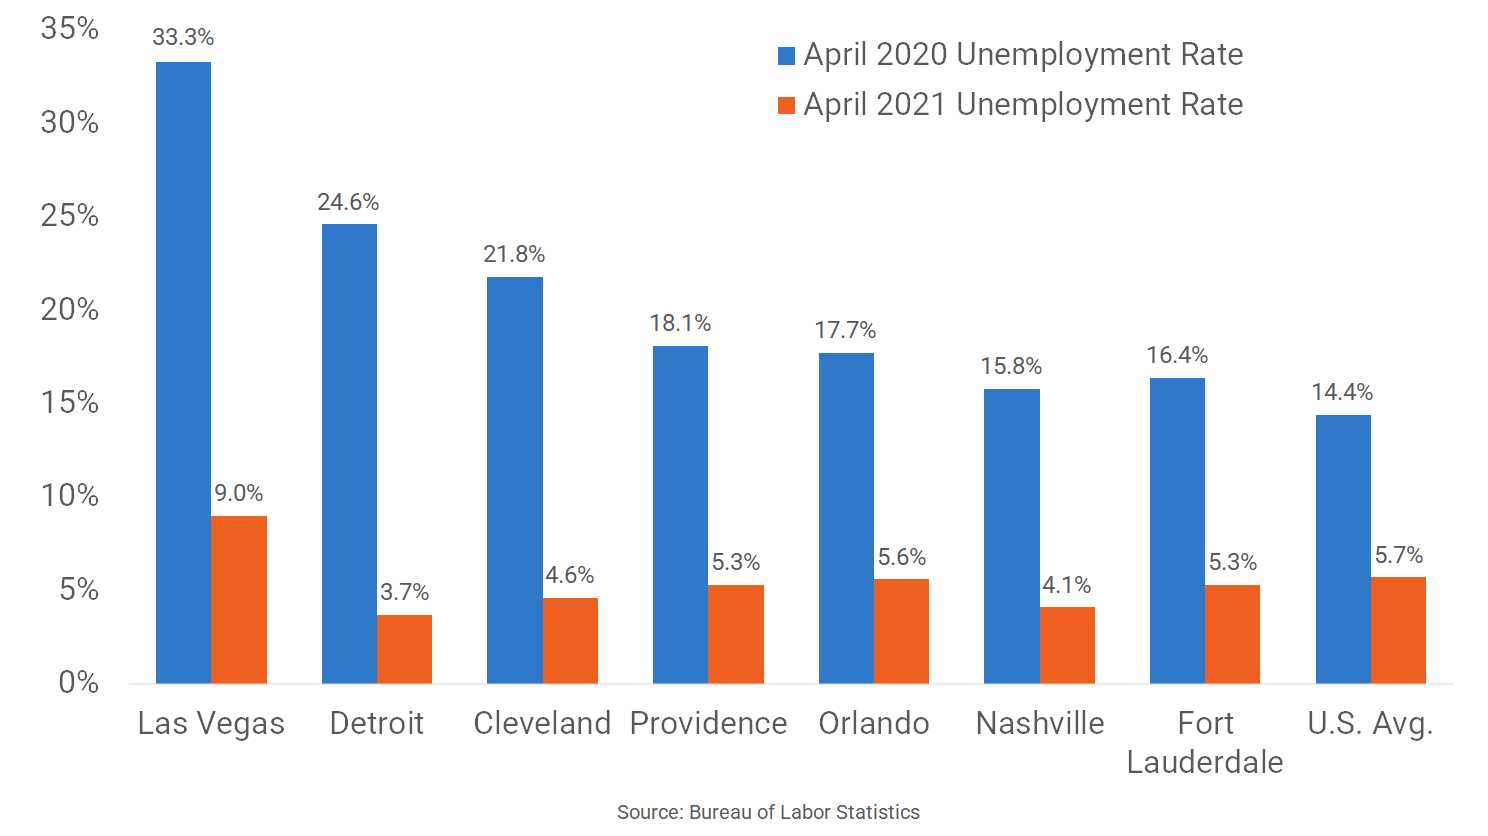 Markets with Big Improvements in Unemployment Rates RealPage